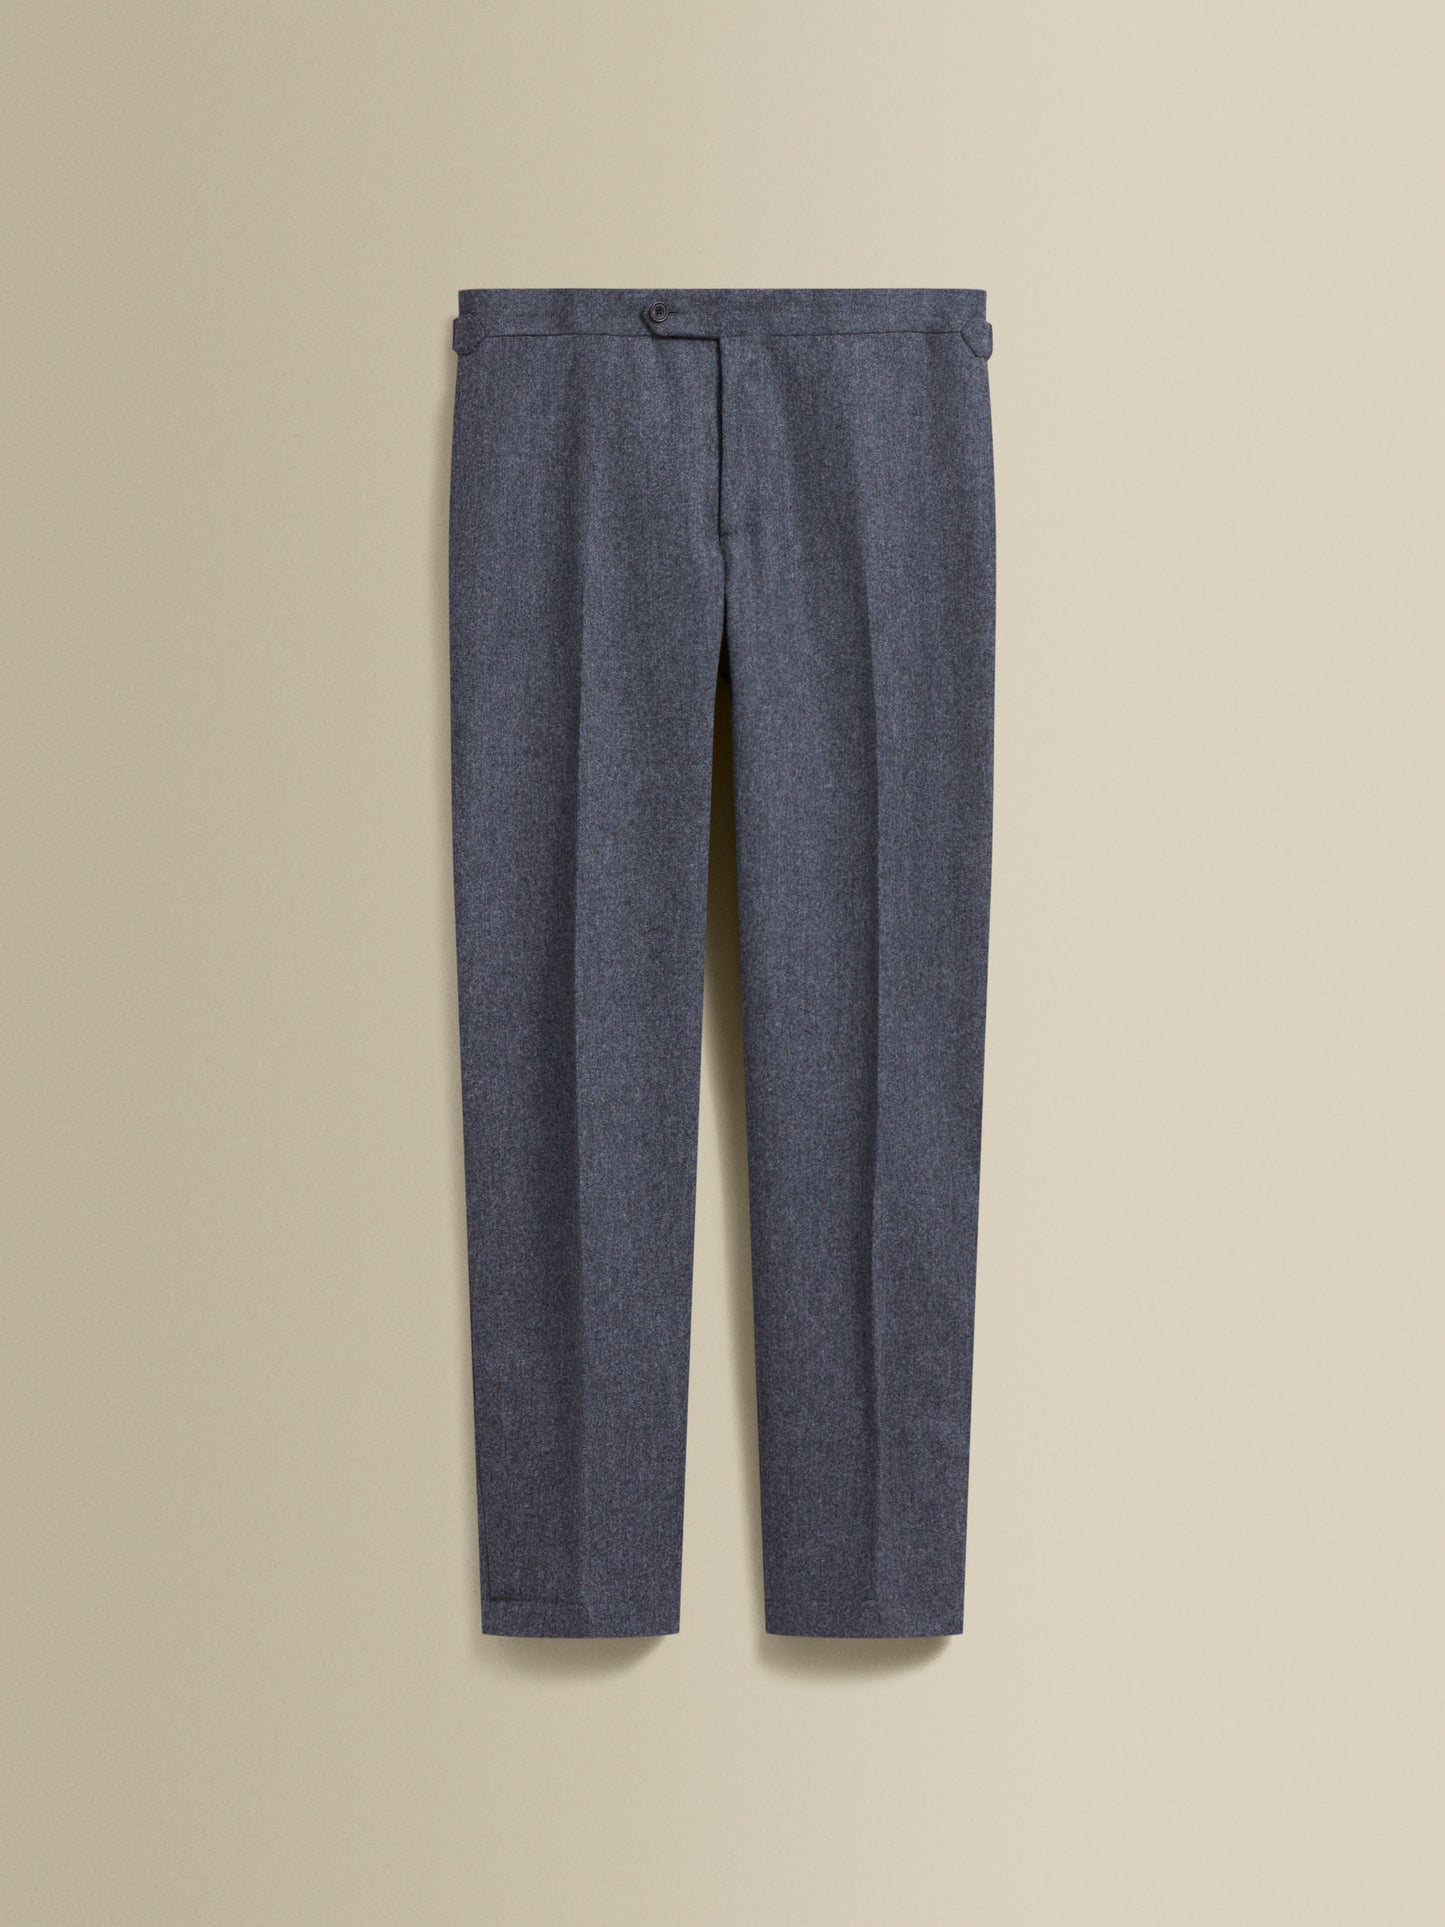 Flannel Single Breasted Wool Suit Grey Trousers Product Image